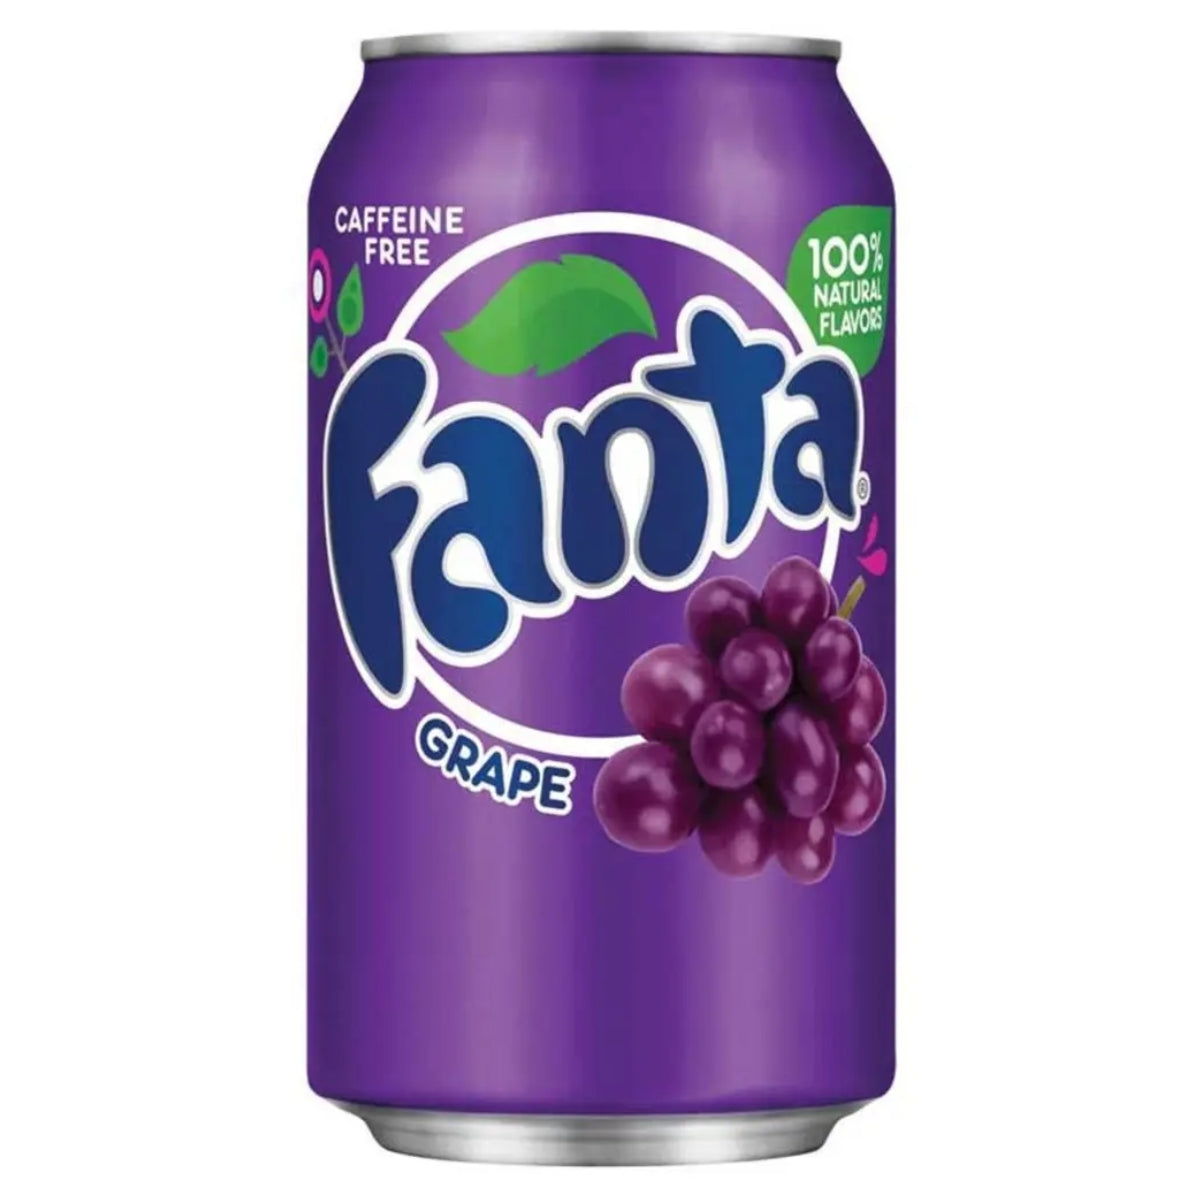 A can of Fanta - Grape Can (America) - 330ml with a purple background and grape artwork, labeled as caffeine-free and containing 100% natural flavors.